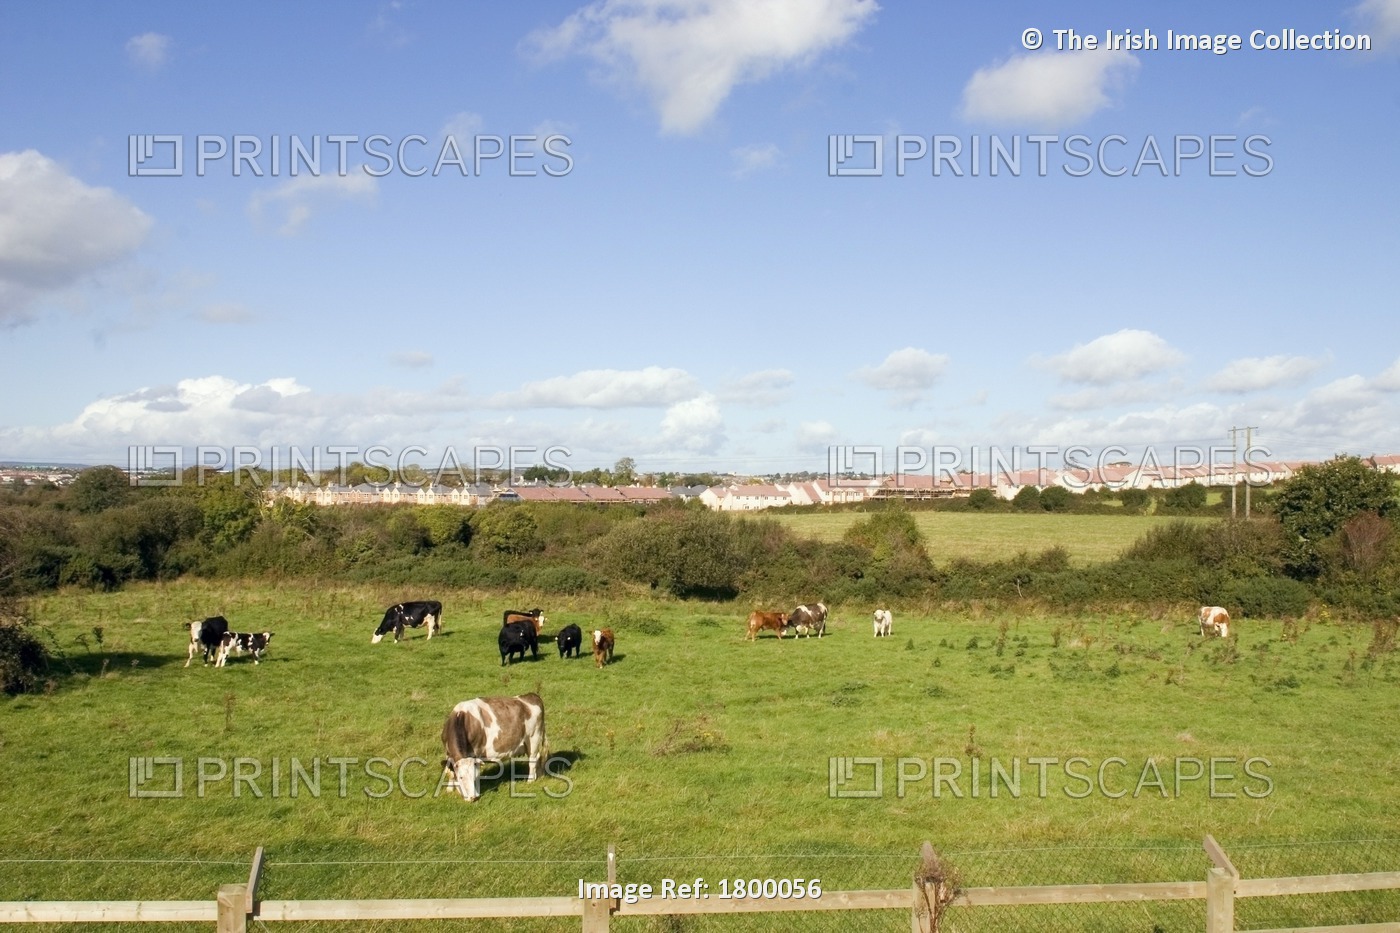 Co Waterford, Ireland; Cows Grazing With The City Of Waterford In The Distance